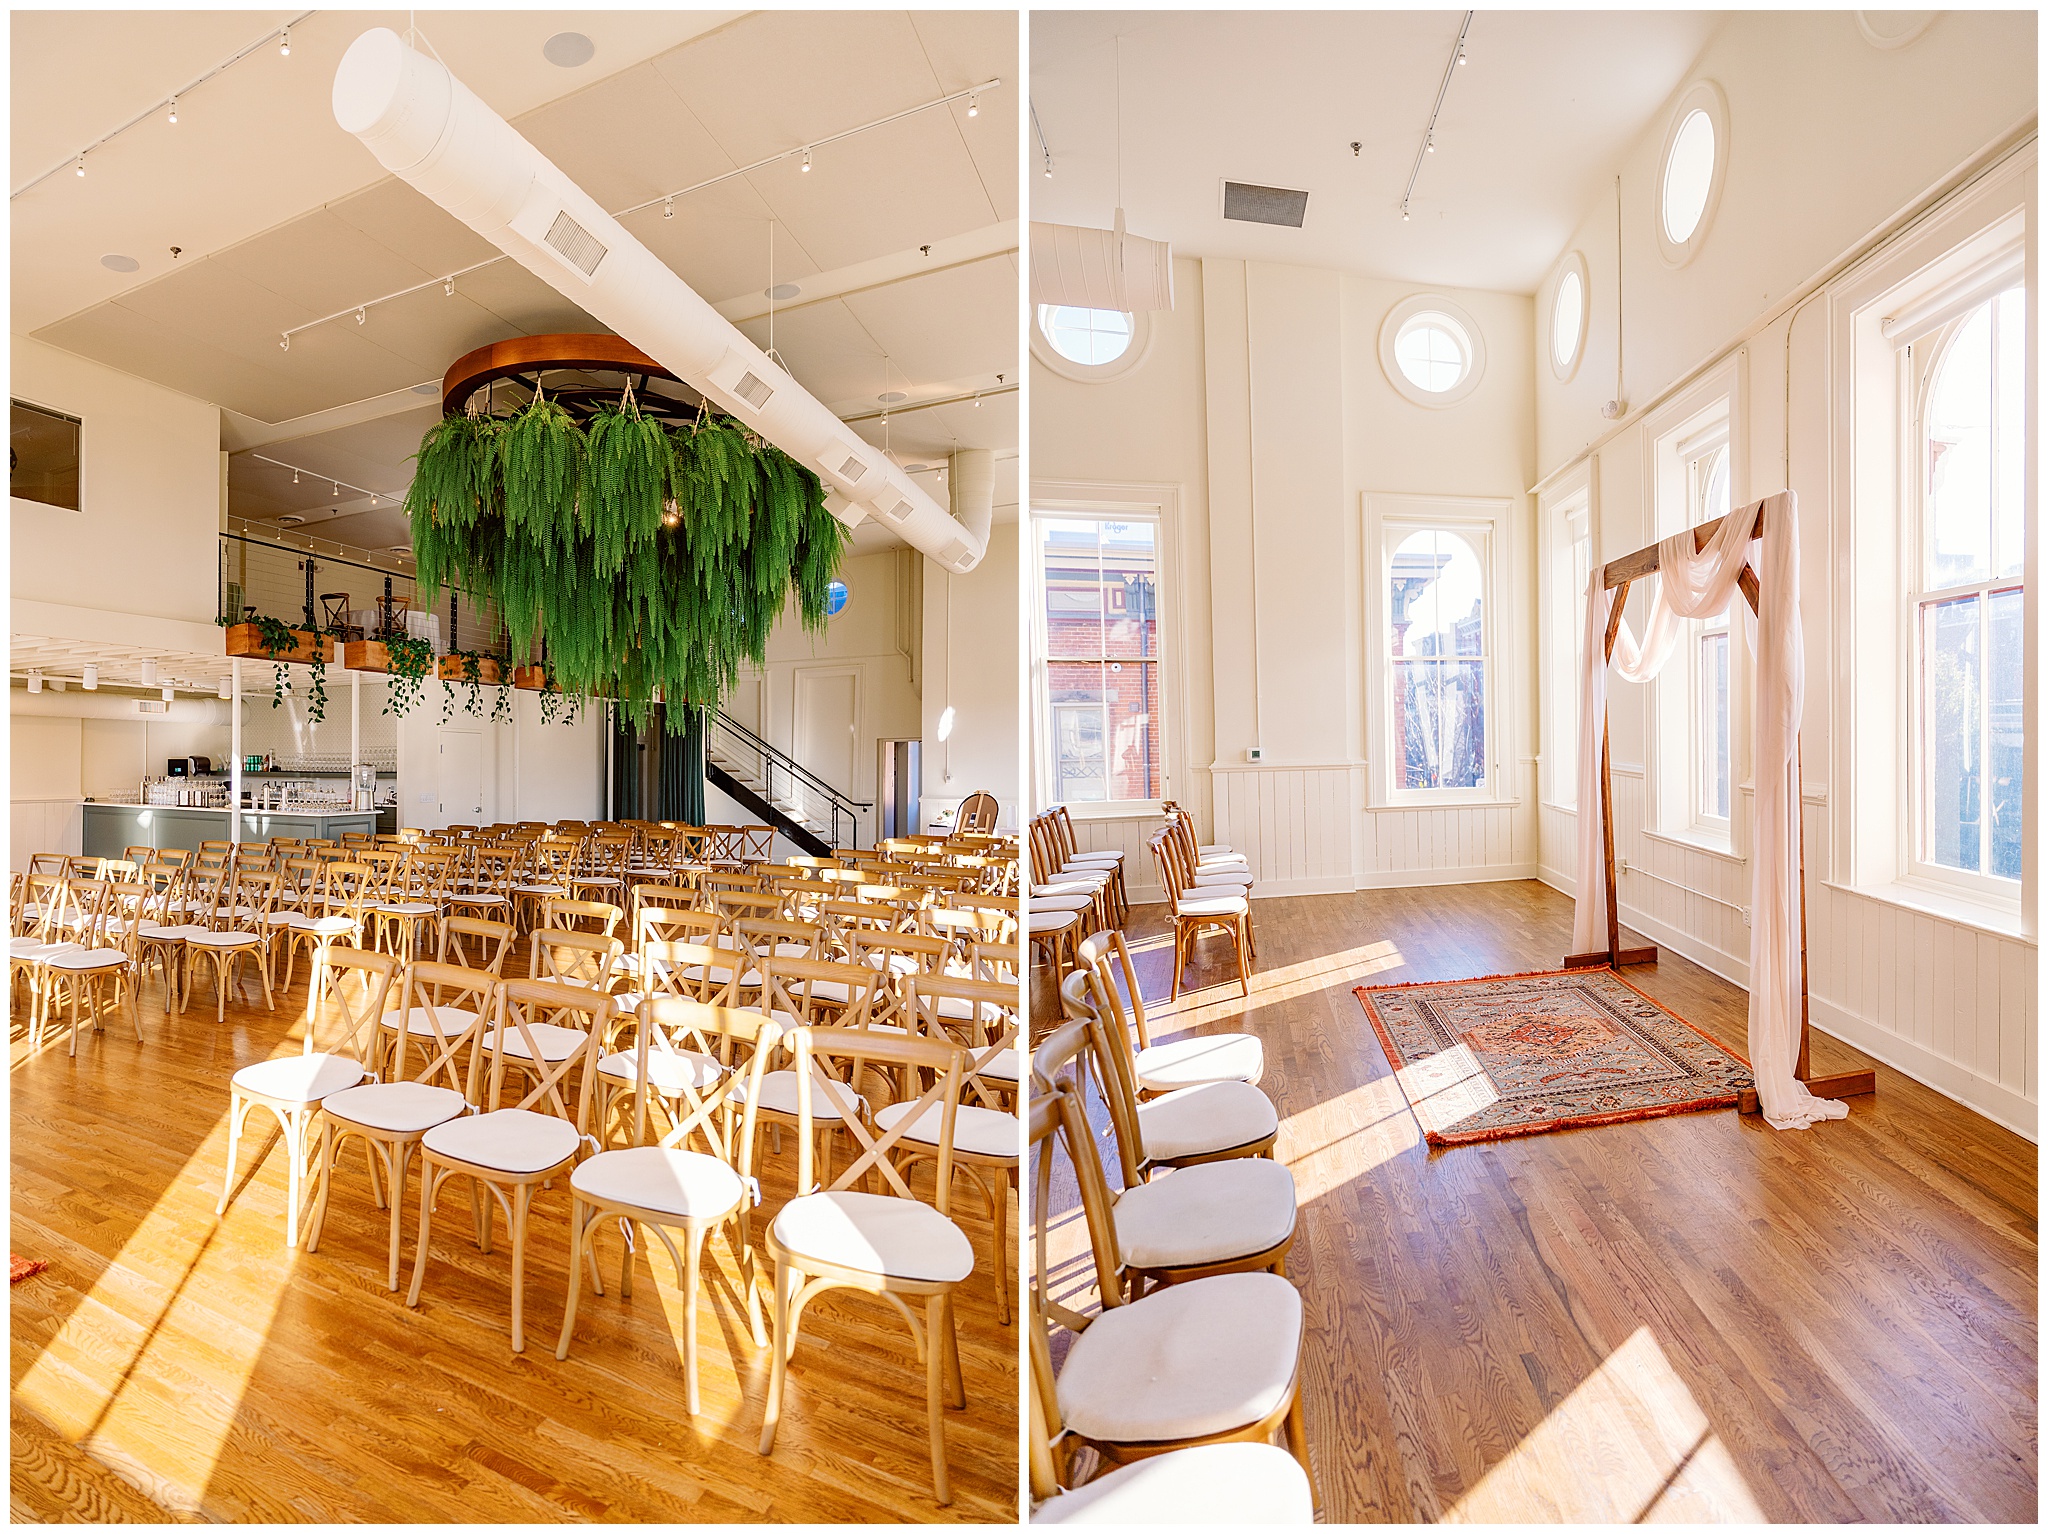 A wedding ceremony setup with wood chairs, high ceilings and a living chandelier